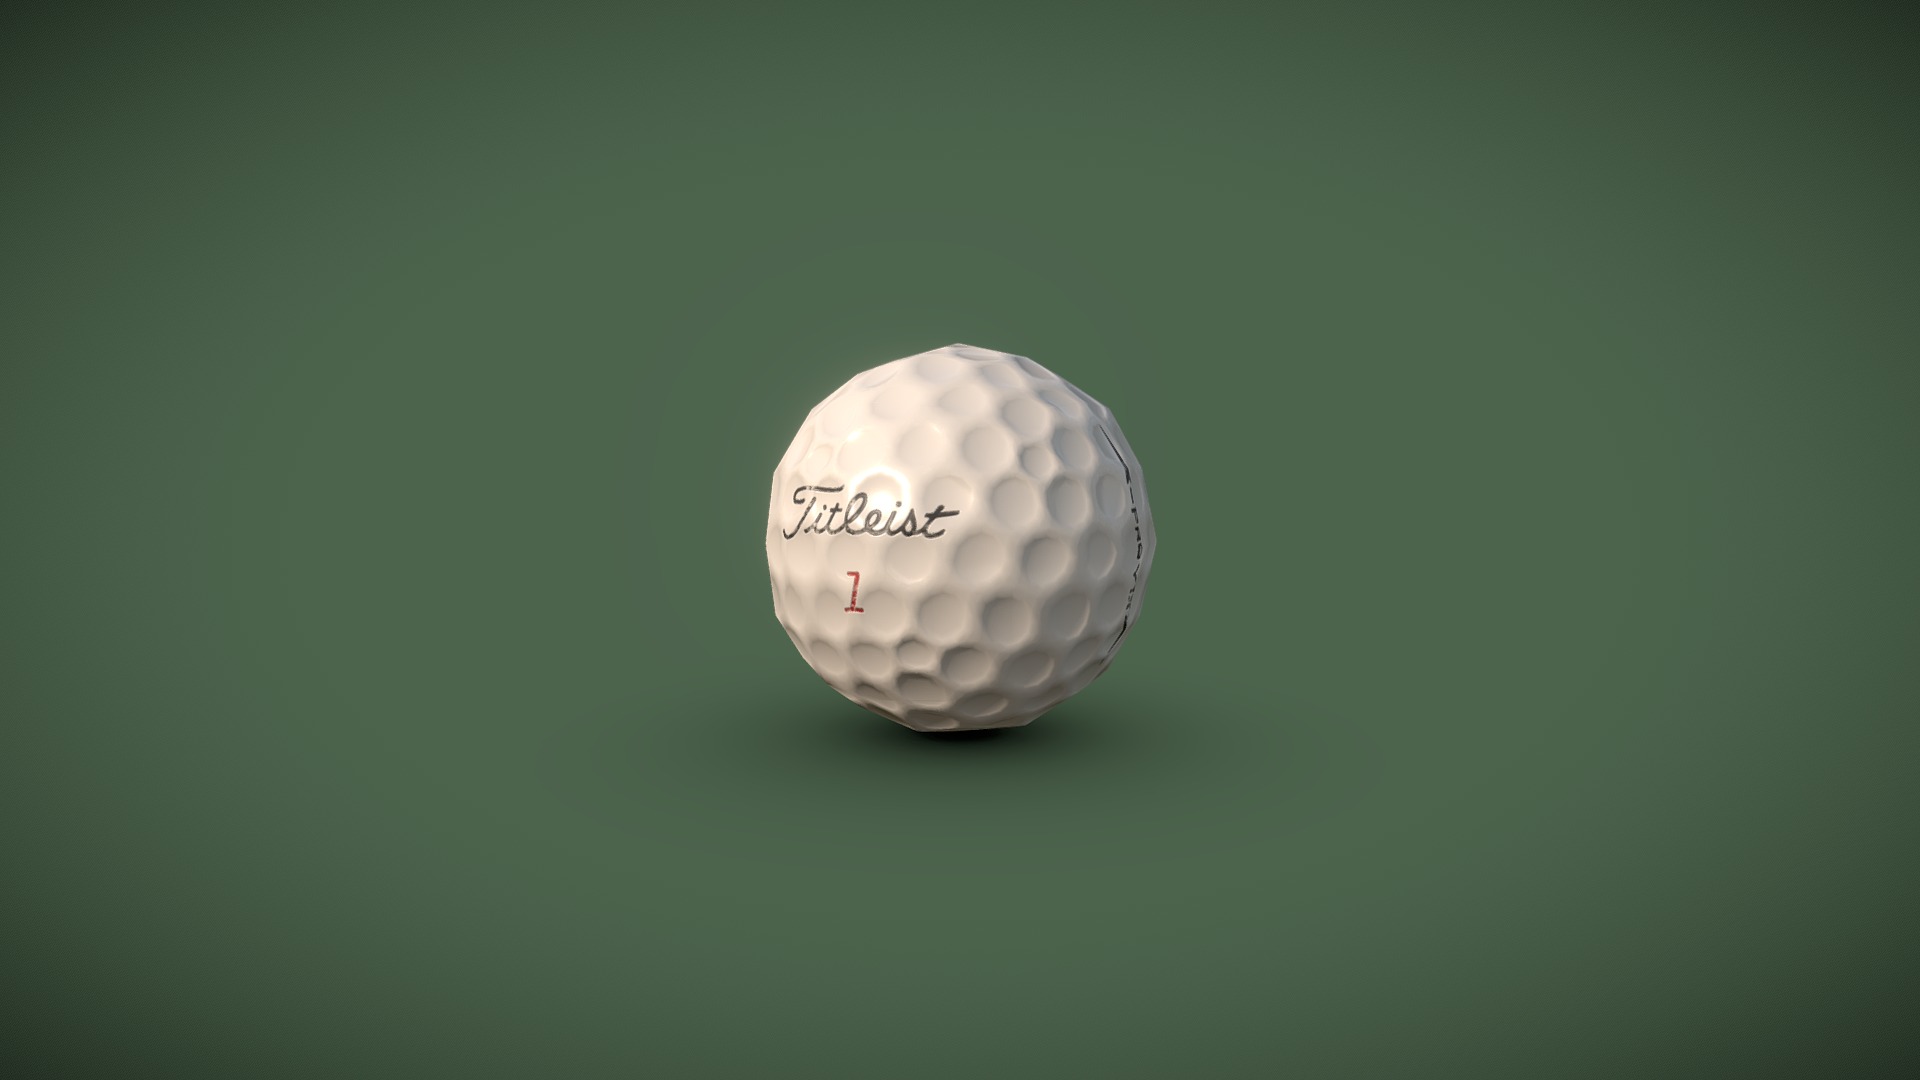 3D model Low Poly Fitleist Golf Ball - This is a 3D model of the Low Poly Fitleist Golf Ball. The 3D model is about a golf ball on a green surface.